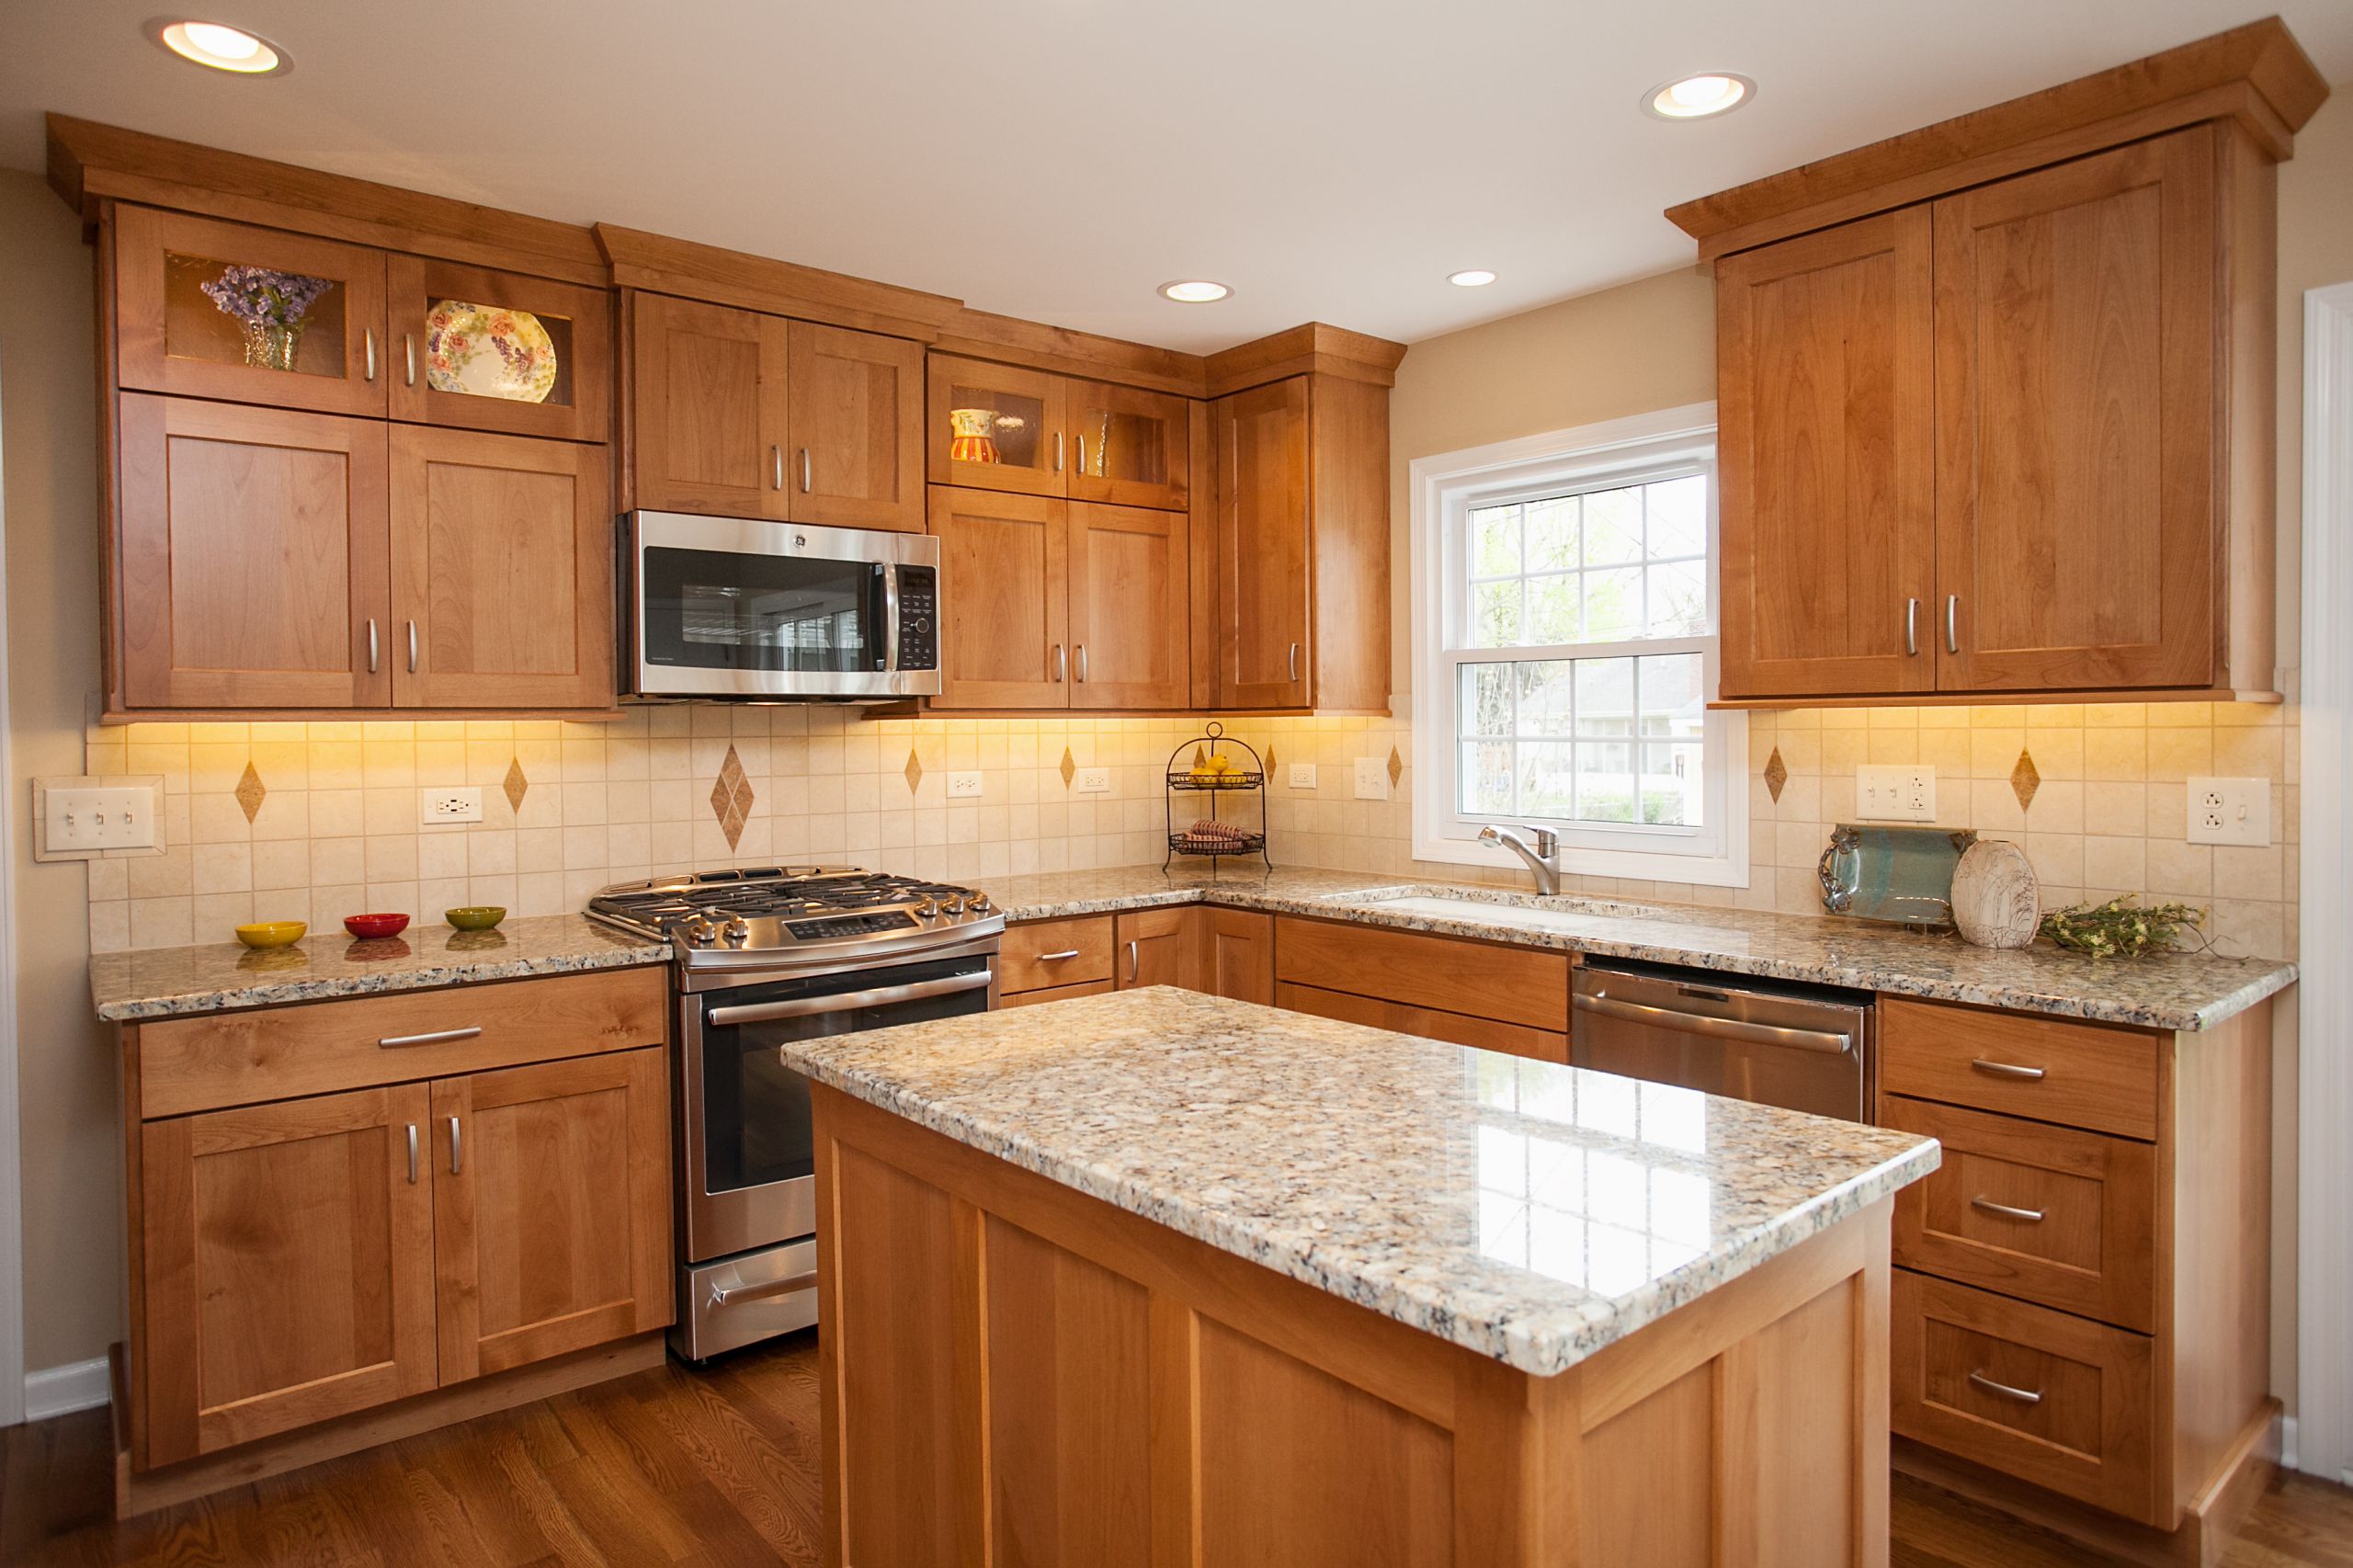 Kitchen Remodels With Oak Cabinets
 EASY ON THE EYES IN NAPERVILLE River Oak Cabinetry & Design